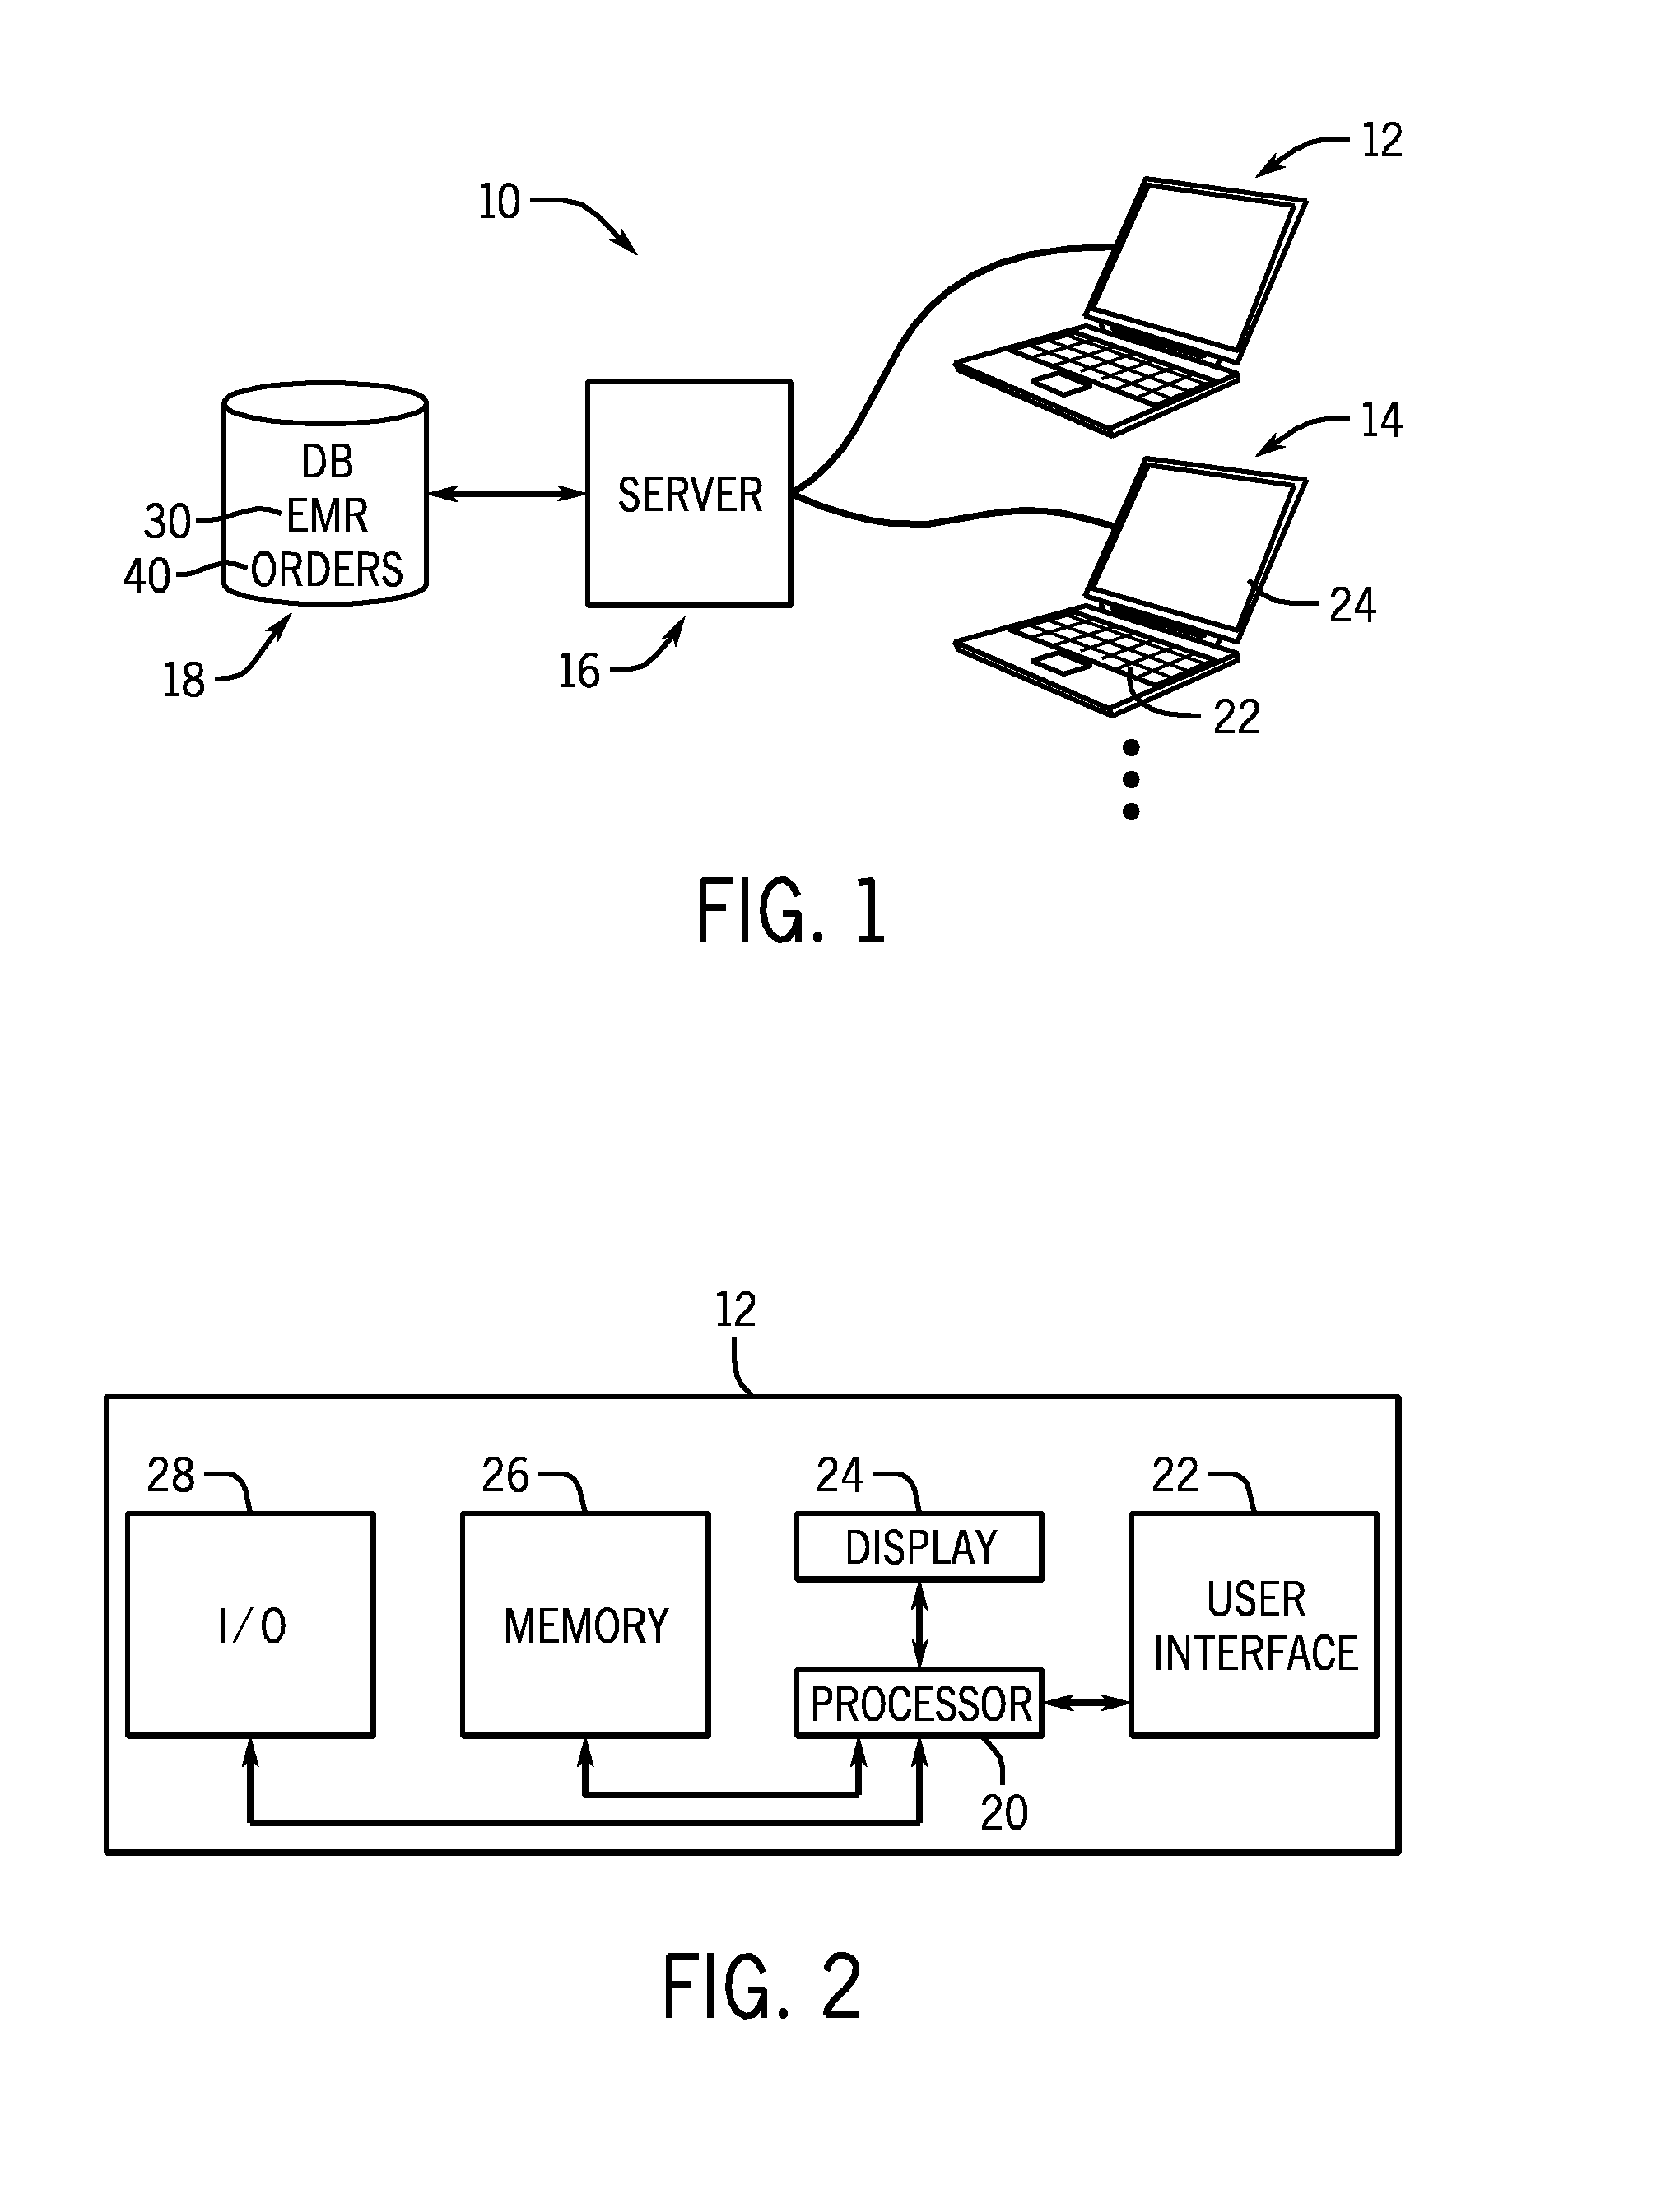 Method for Minimizing Entry of Medically Similar Orders in a Computerized Medical Records System